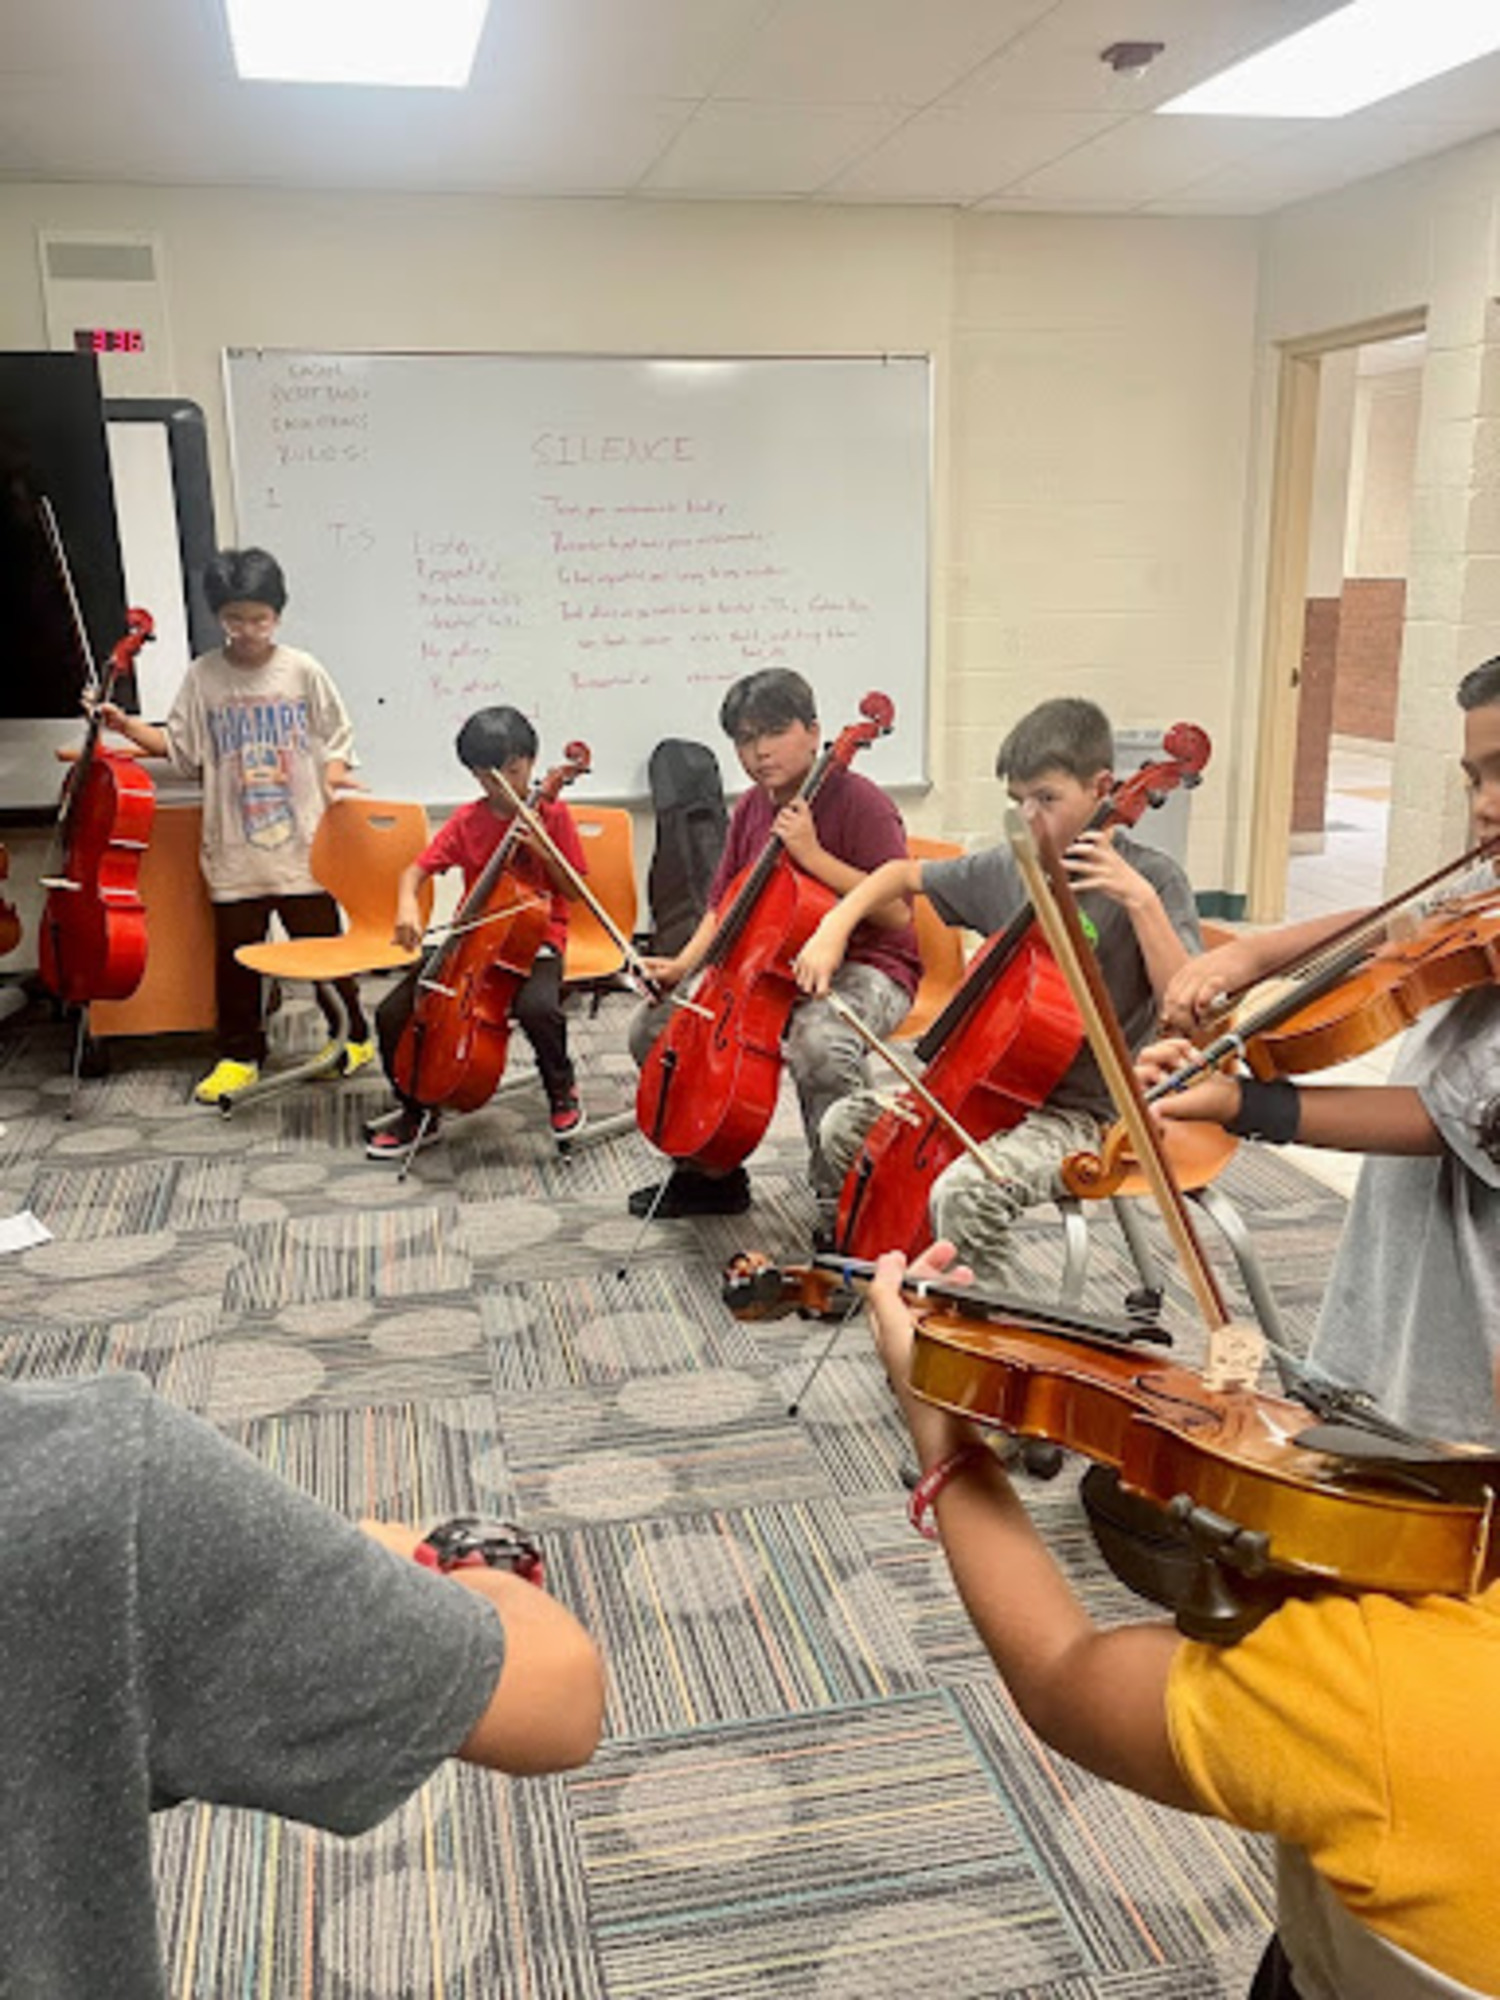 Electives - strings/orchestra